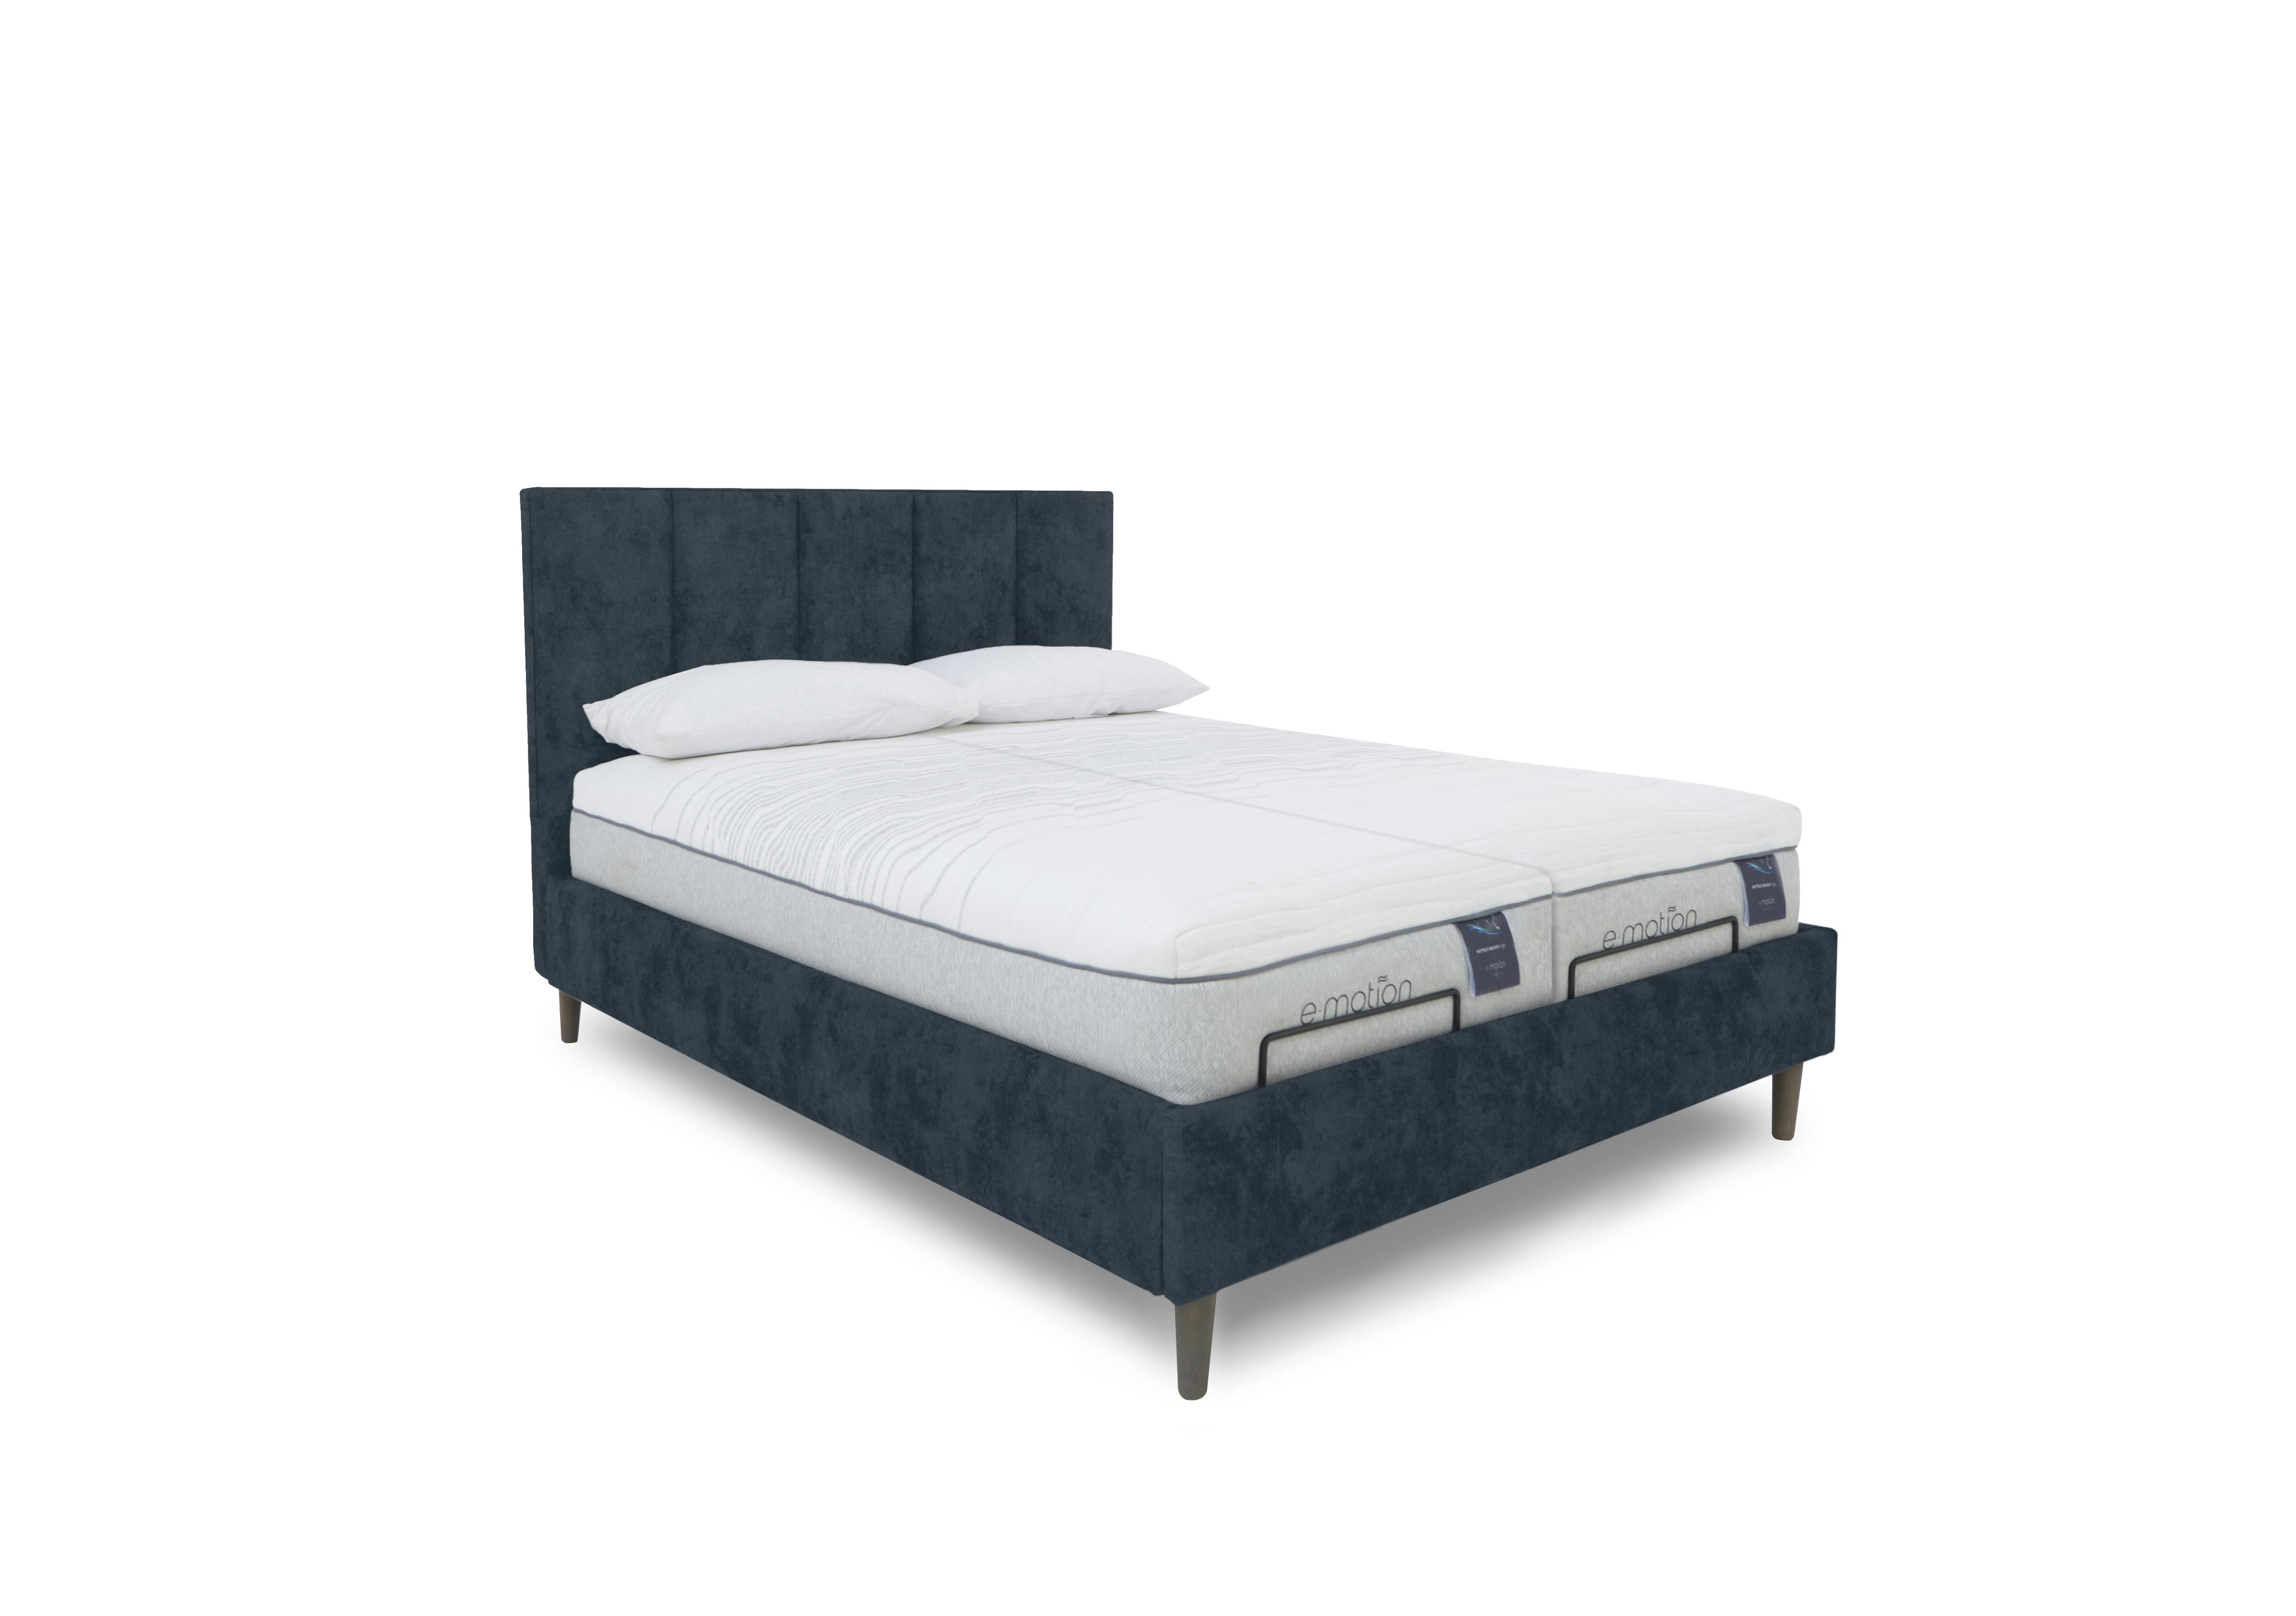 E-Motion Aiko Dual Adjustable Bed Frame with Massage Function in Daytona Ocean on Furniture Village